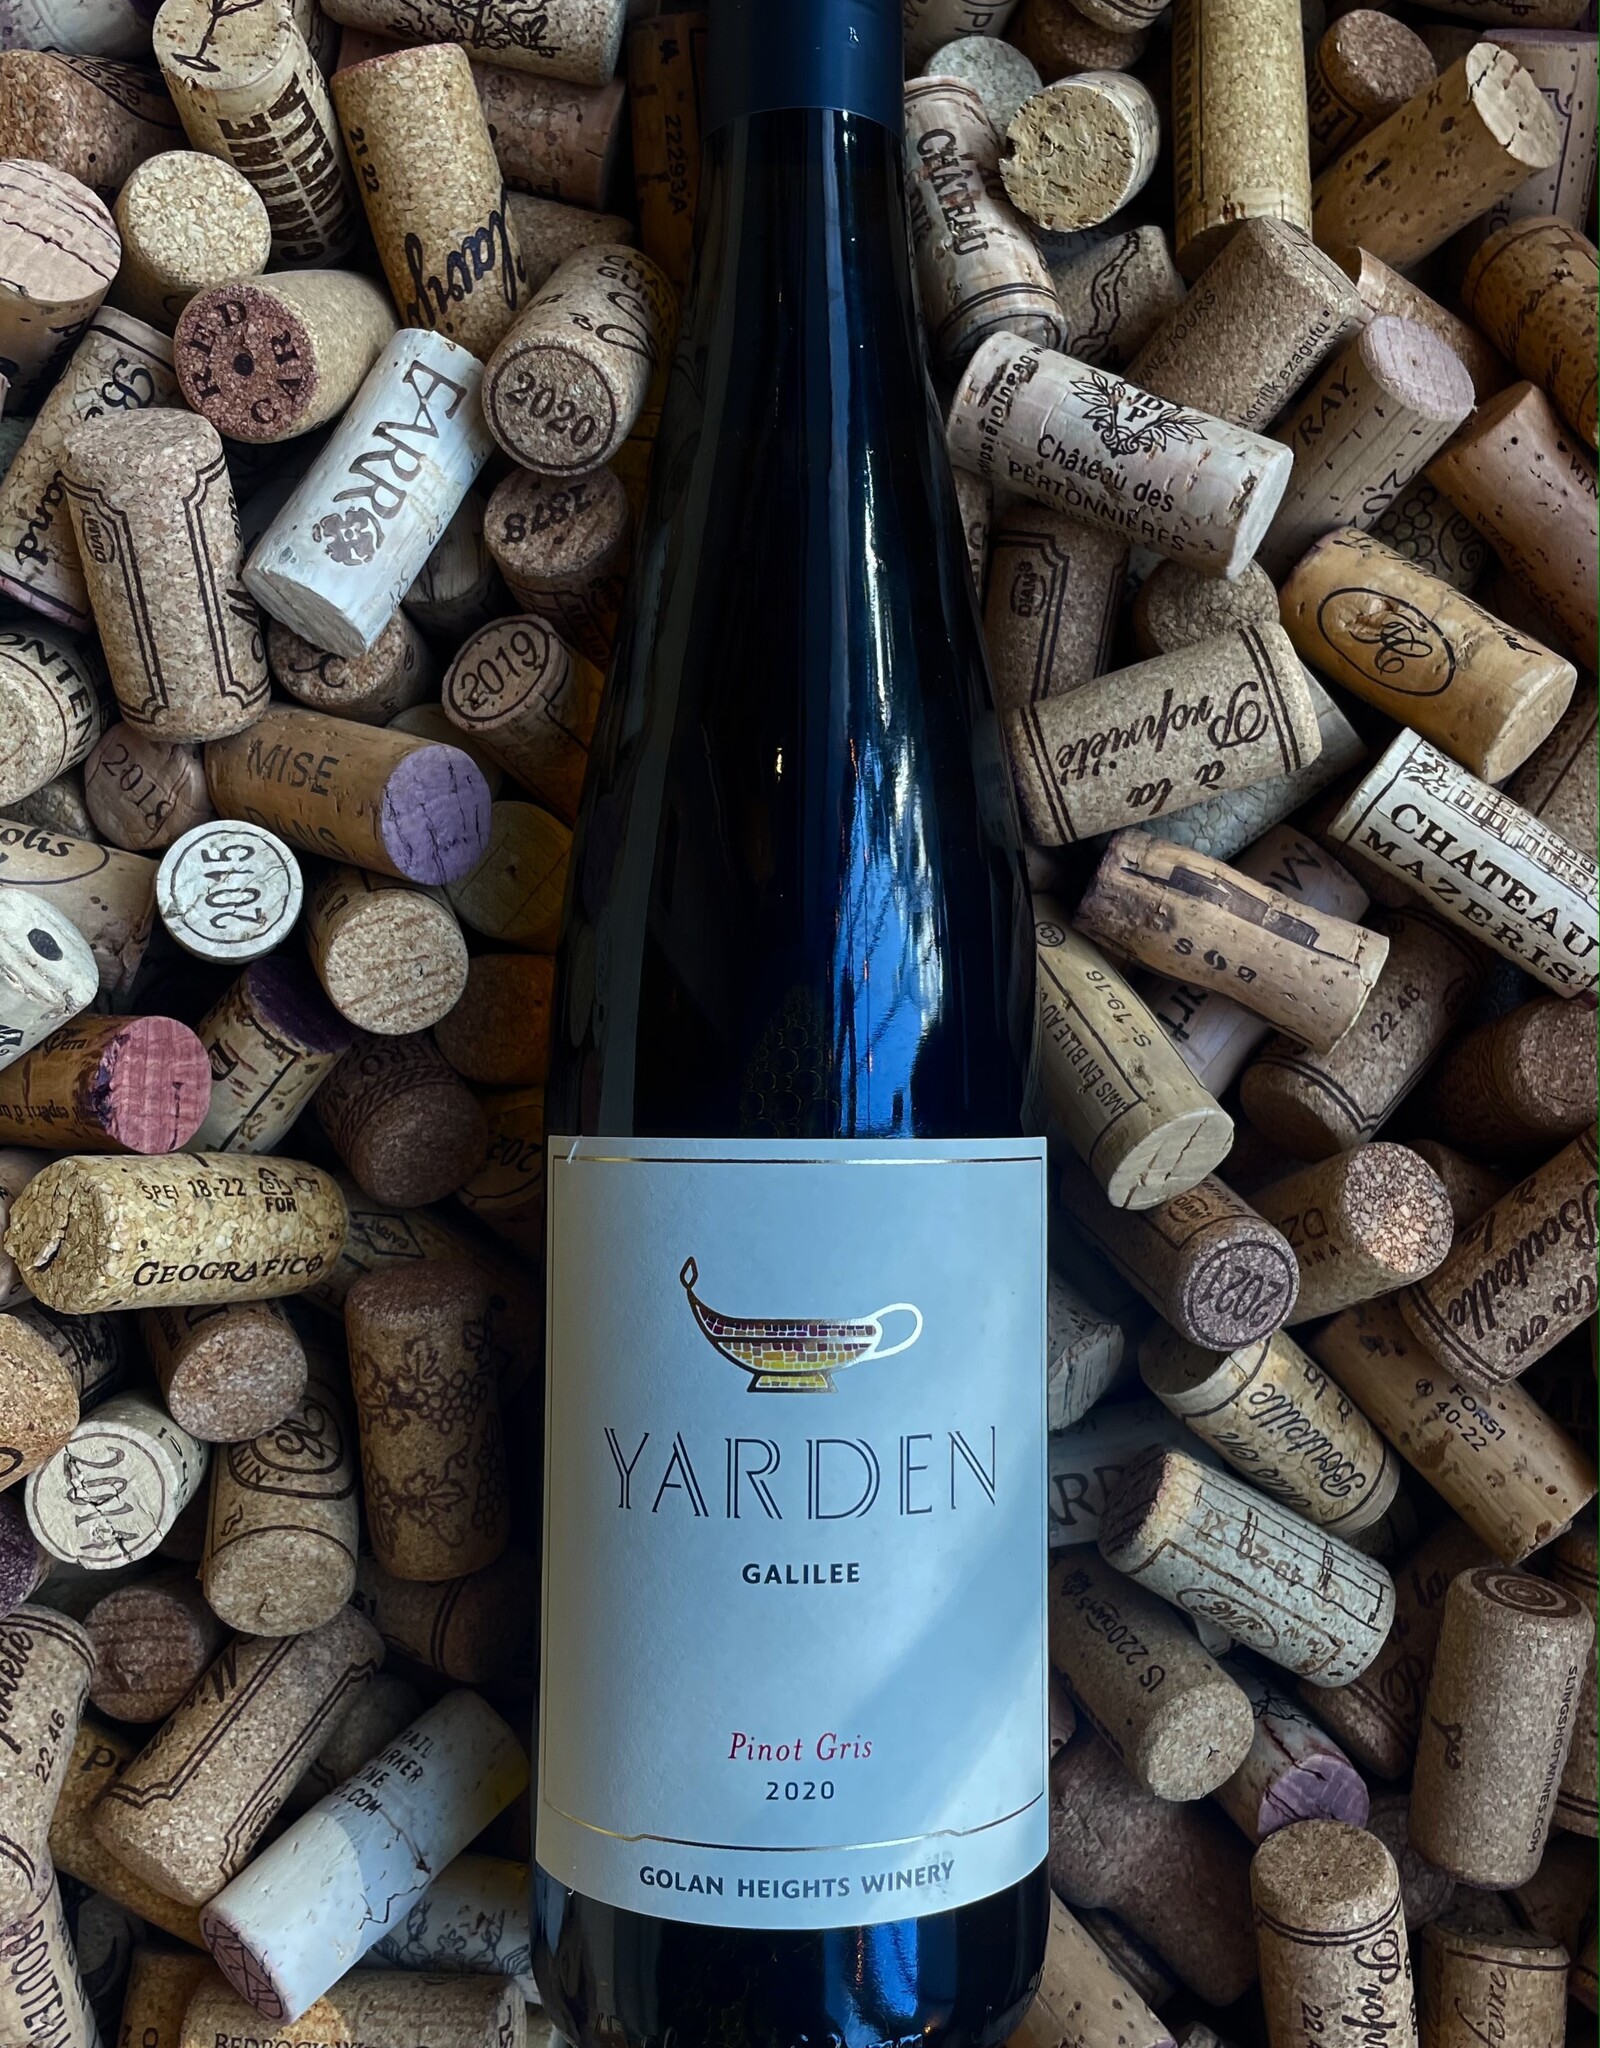 Golan Heights Winery Yarden Pinot Gris 2020 750ml